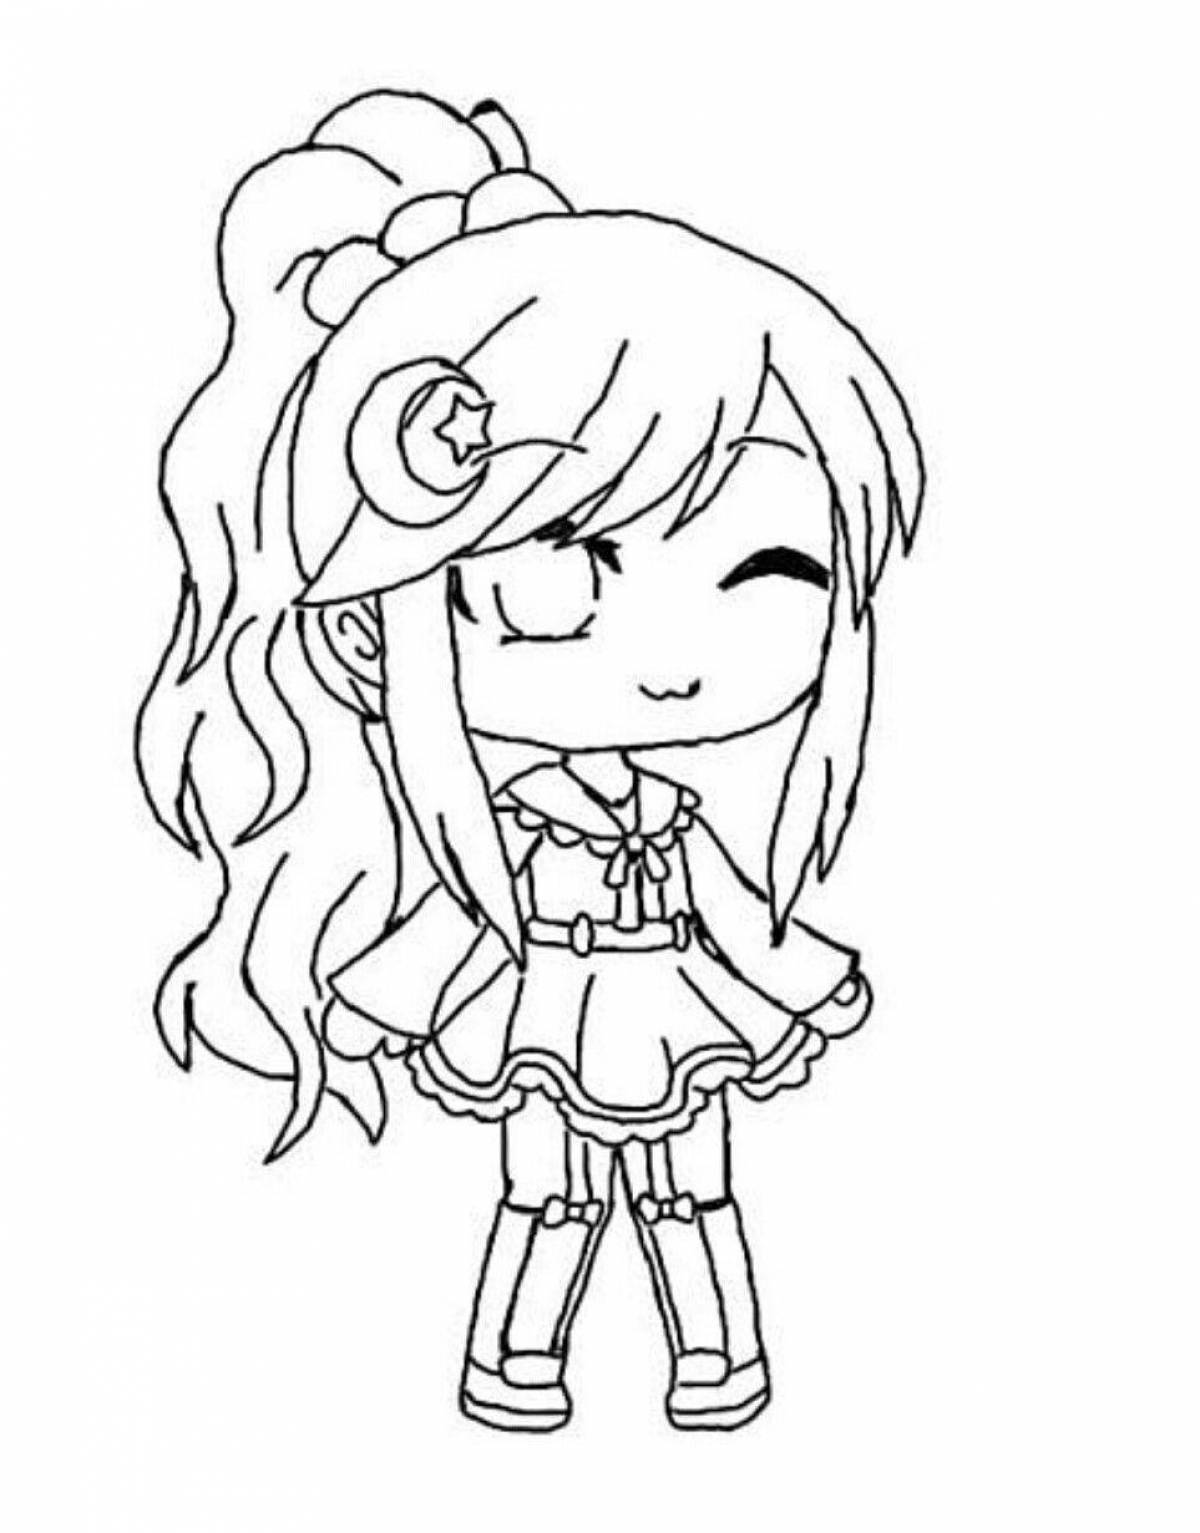 Exquisite gacha life hair coloring page